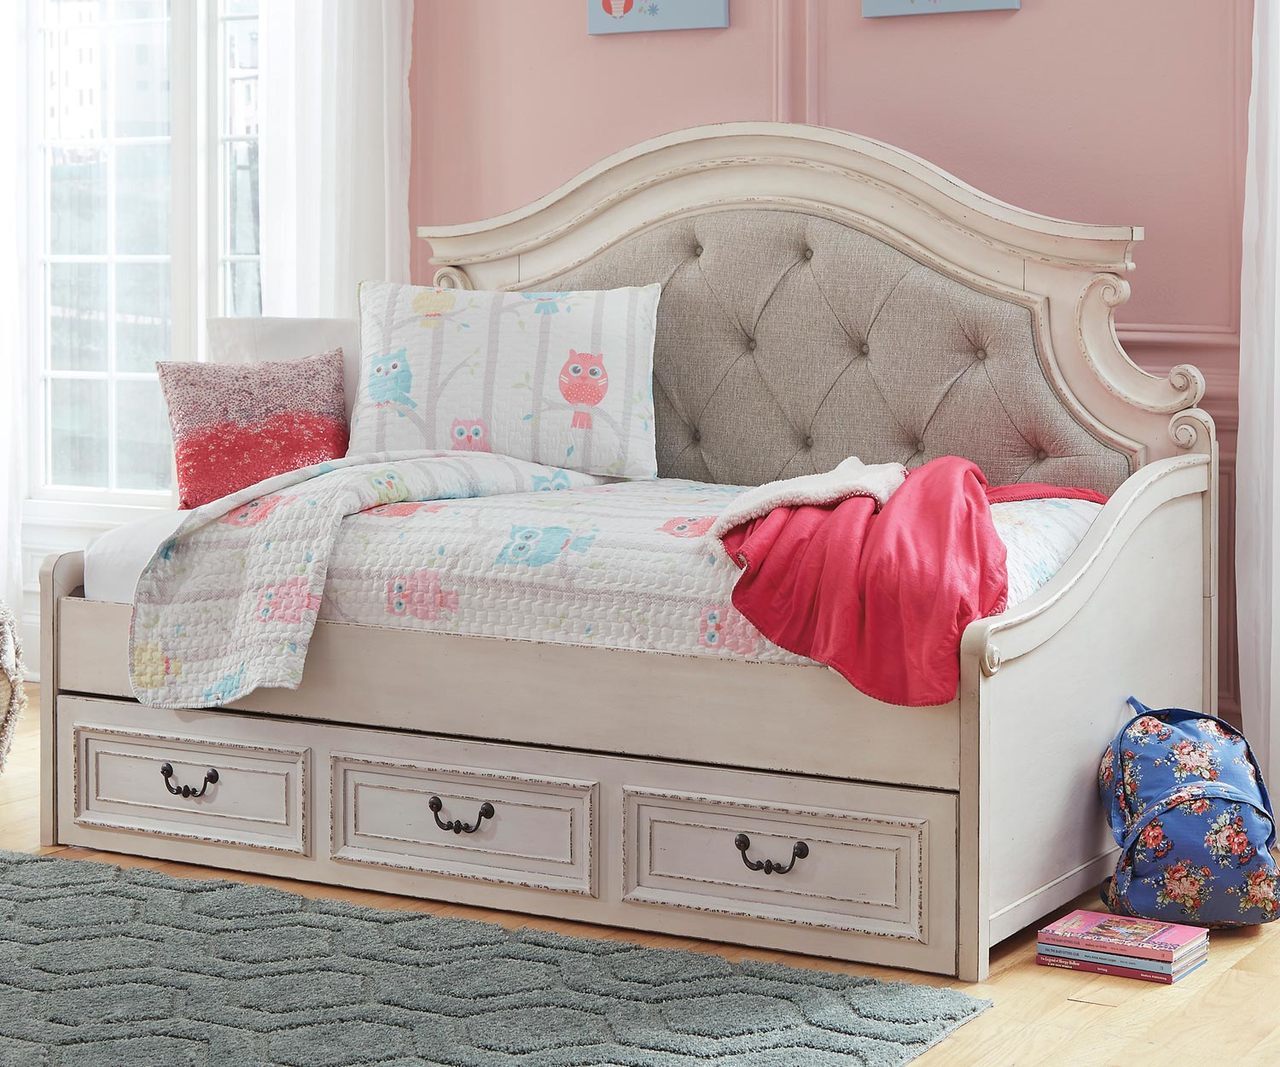 The Best Day Beds for Your Child’s Room or Guest Room - Kids Furniture Warehouse